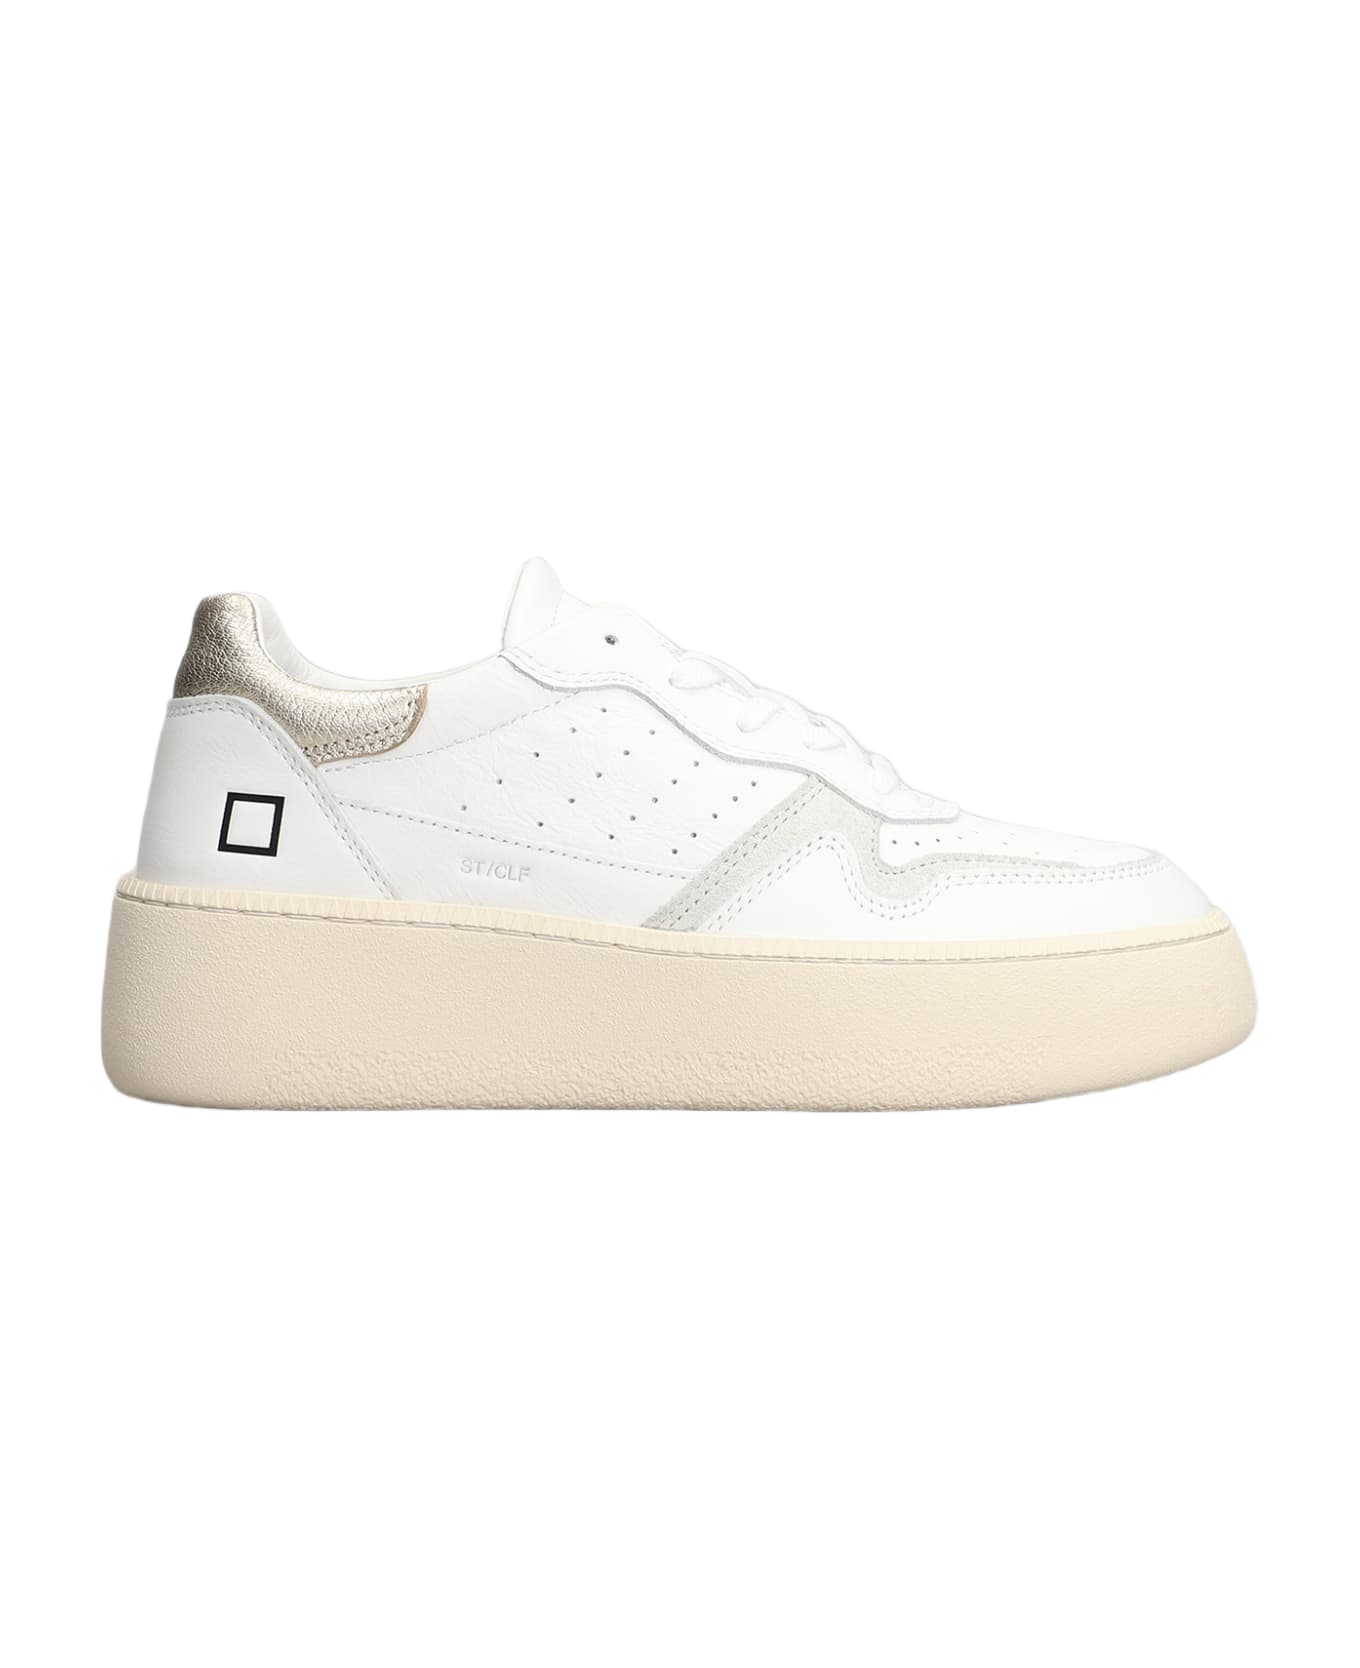 D.A.T.E. Step Sneakers In White Leather - Bianco/Platino ウェッジシューズ